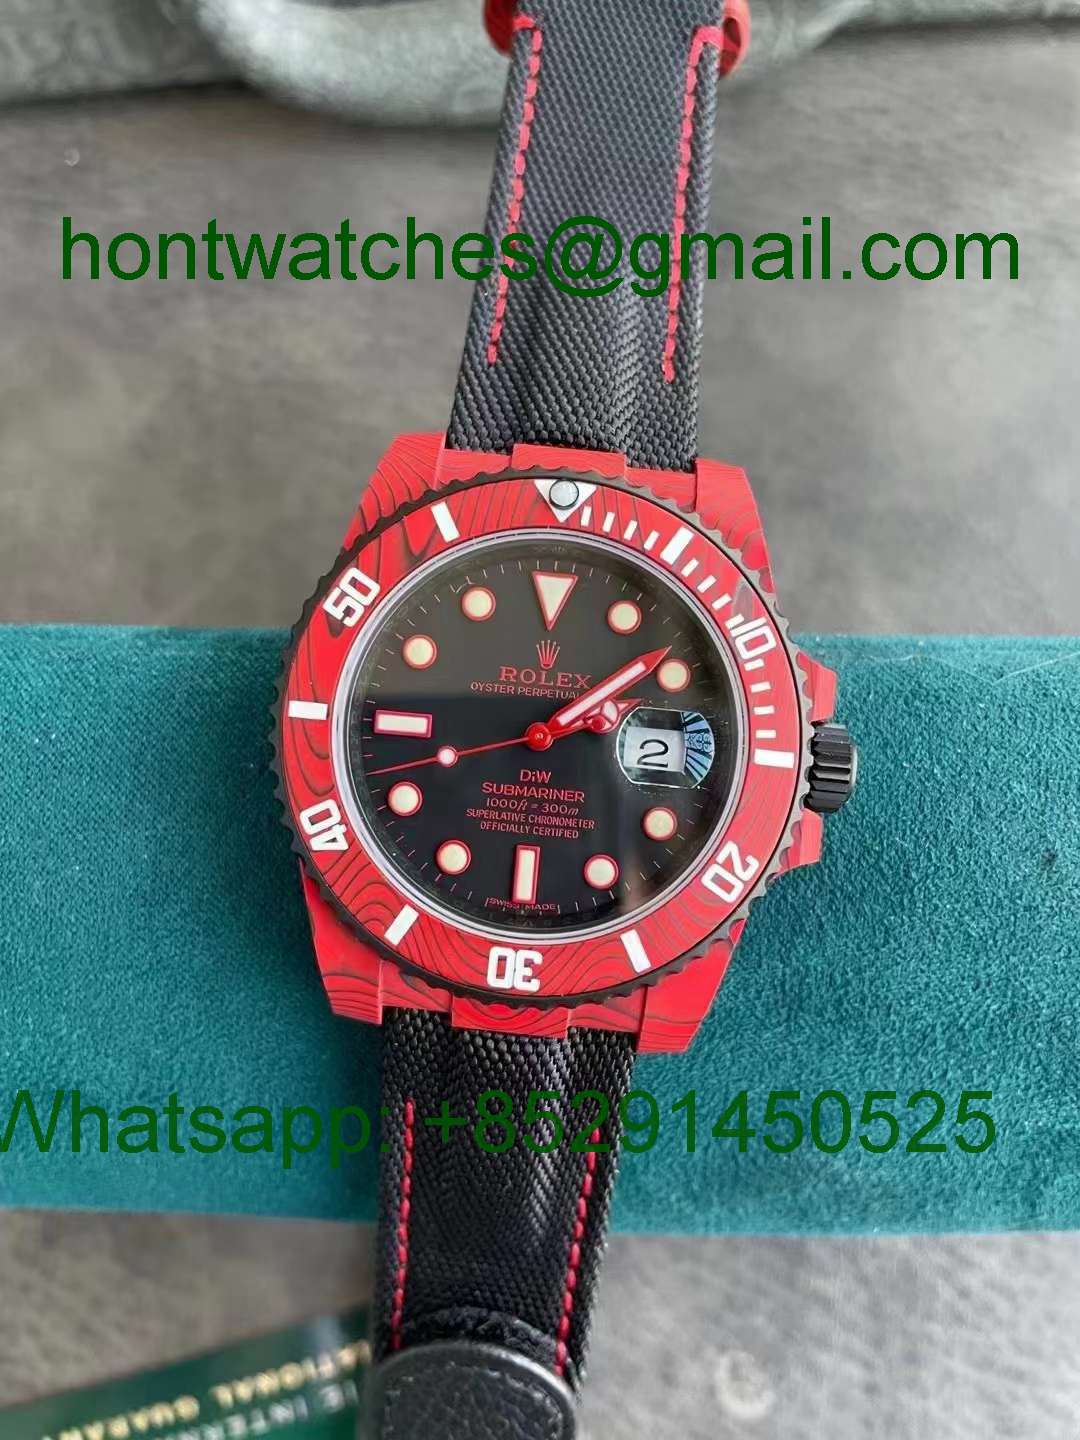 Replica Rolex Submariner DIW Red Carbon VSF 1:1 Best - Hontwatch Wholesale